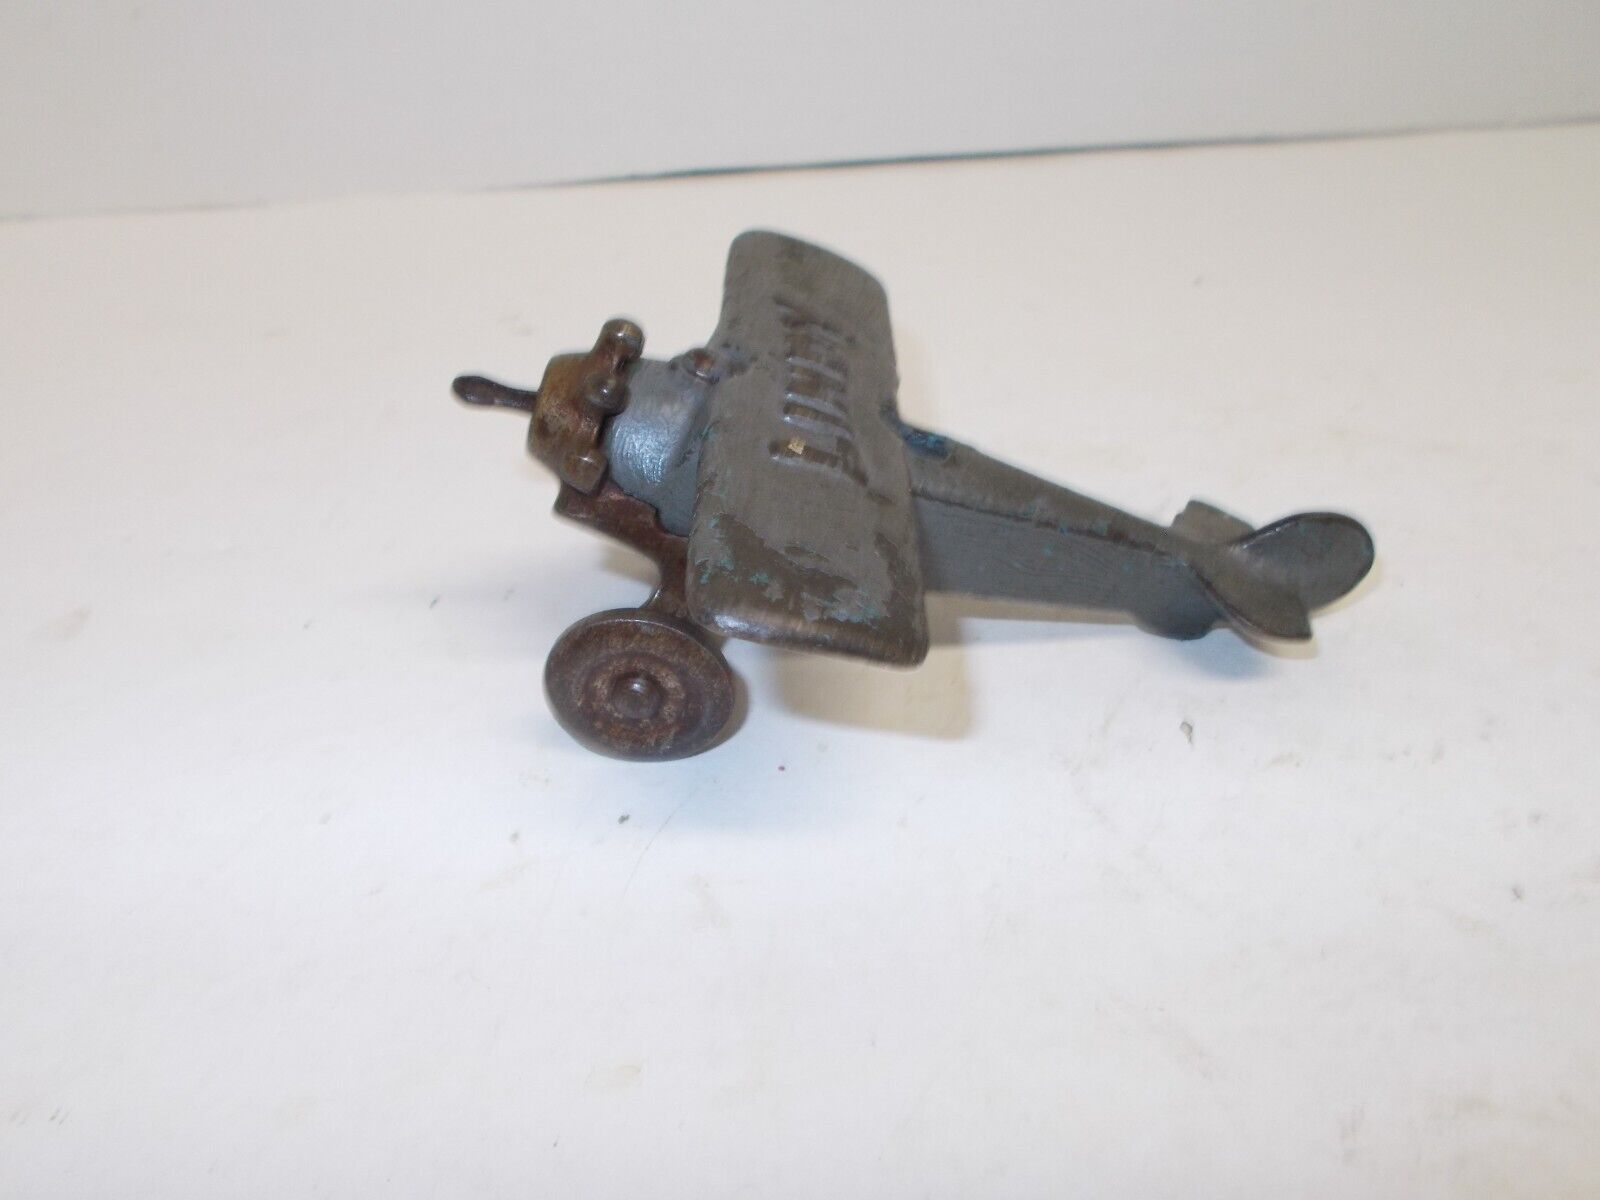 Vintage Hubley Toy Co. Cast Iron Plane marked “Lindy” on Top of Wing, ca 1930s